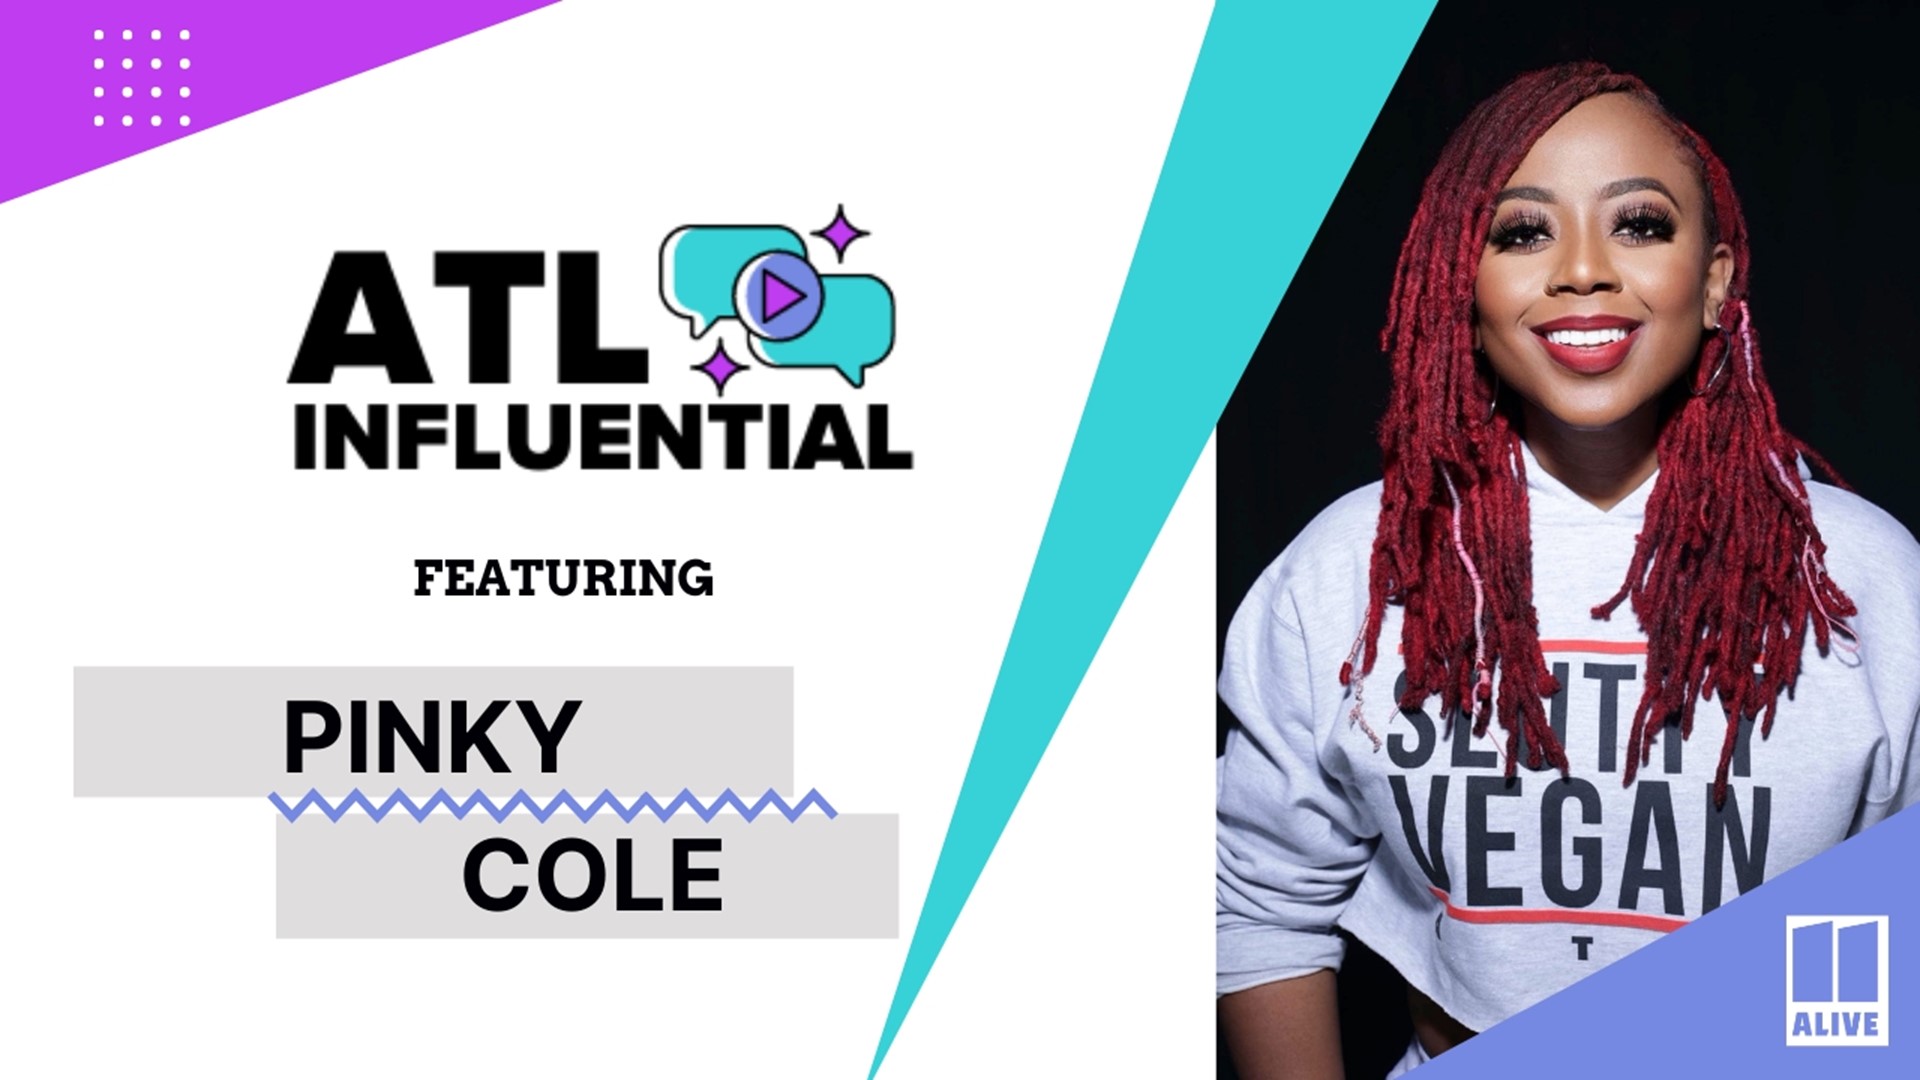 ATL Influential host Tianne Johnson sits down with Pinky Cole, owner of Slutty Vegan, to discuss her career, family and more!